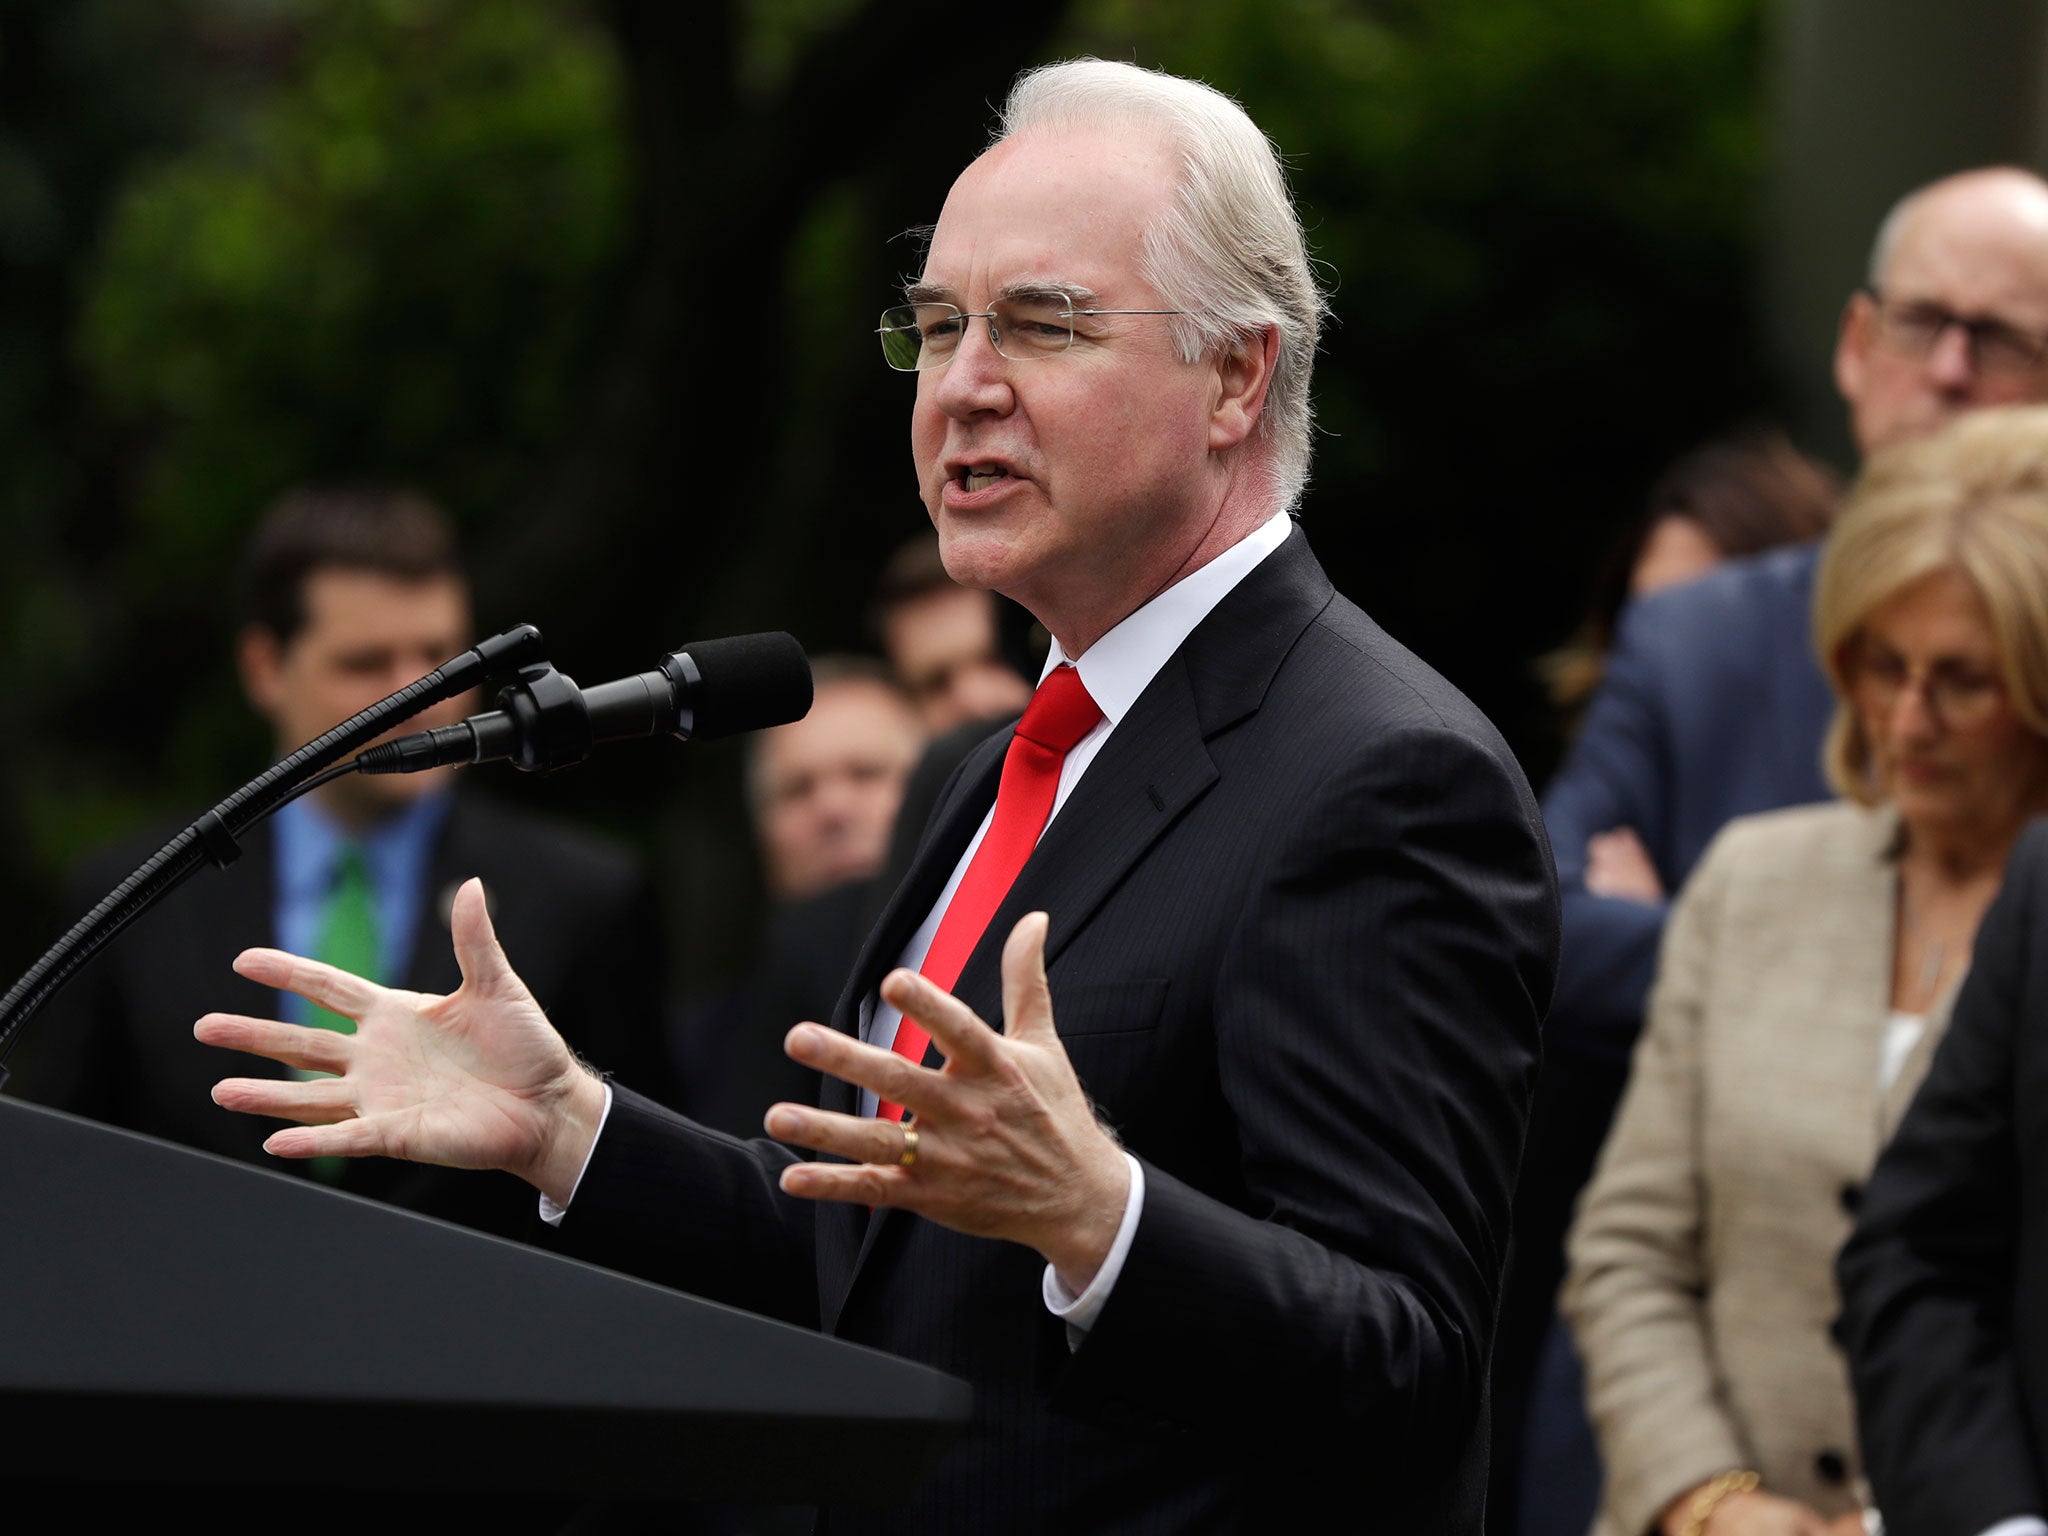 Tom Price, the US Health and Human Services Secretary, believes abstinence is more effective than contraception at stopping teenage pregnancies